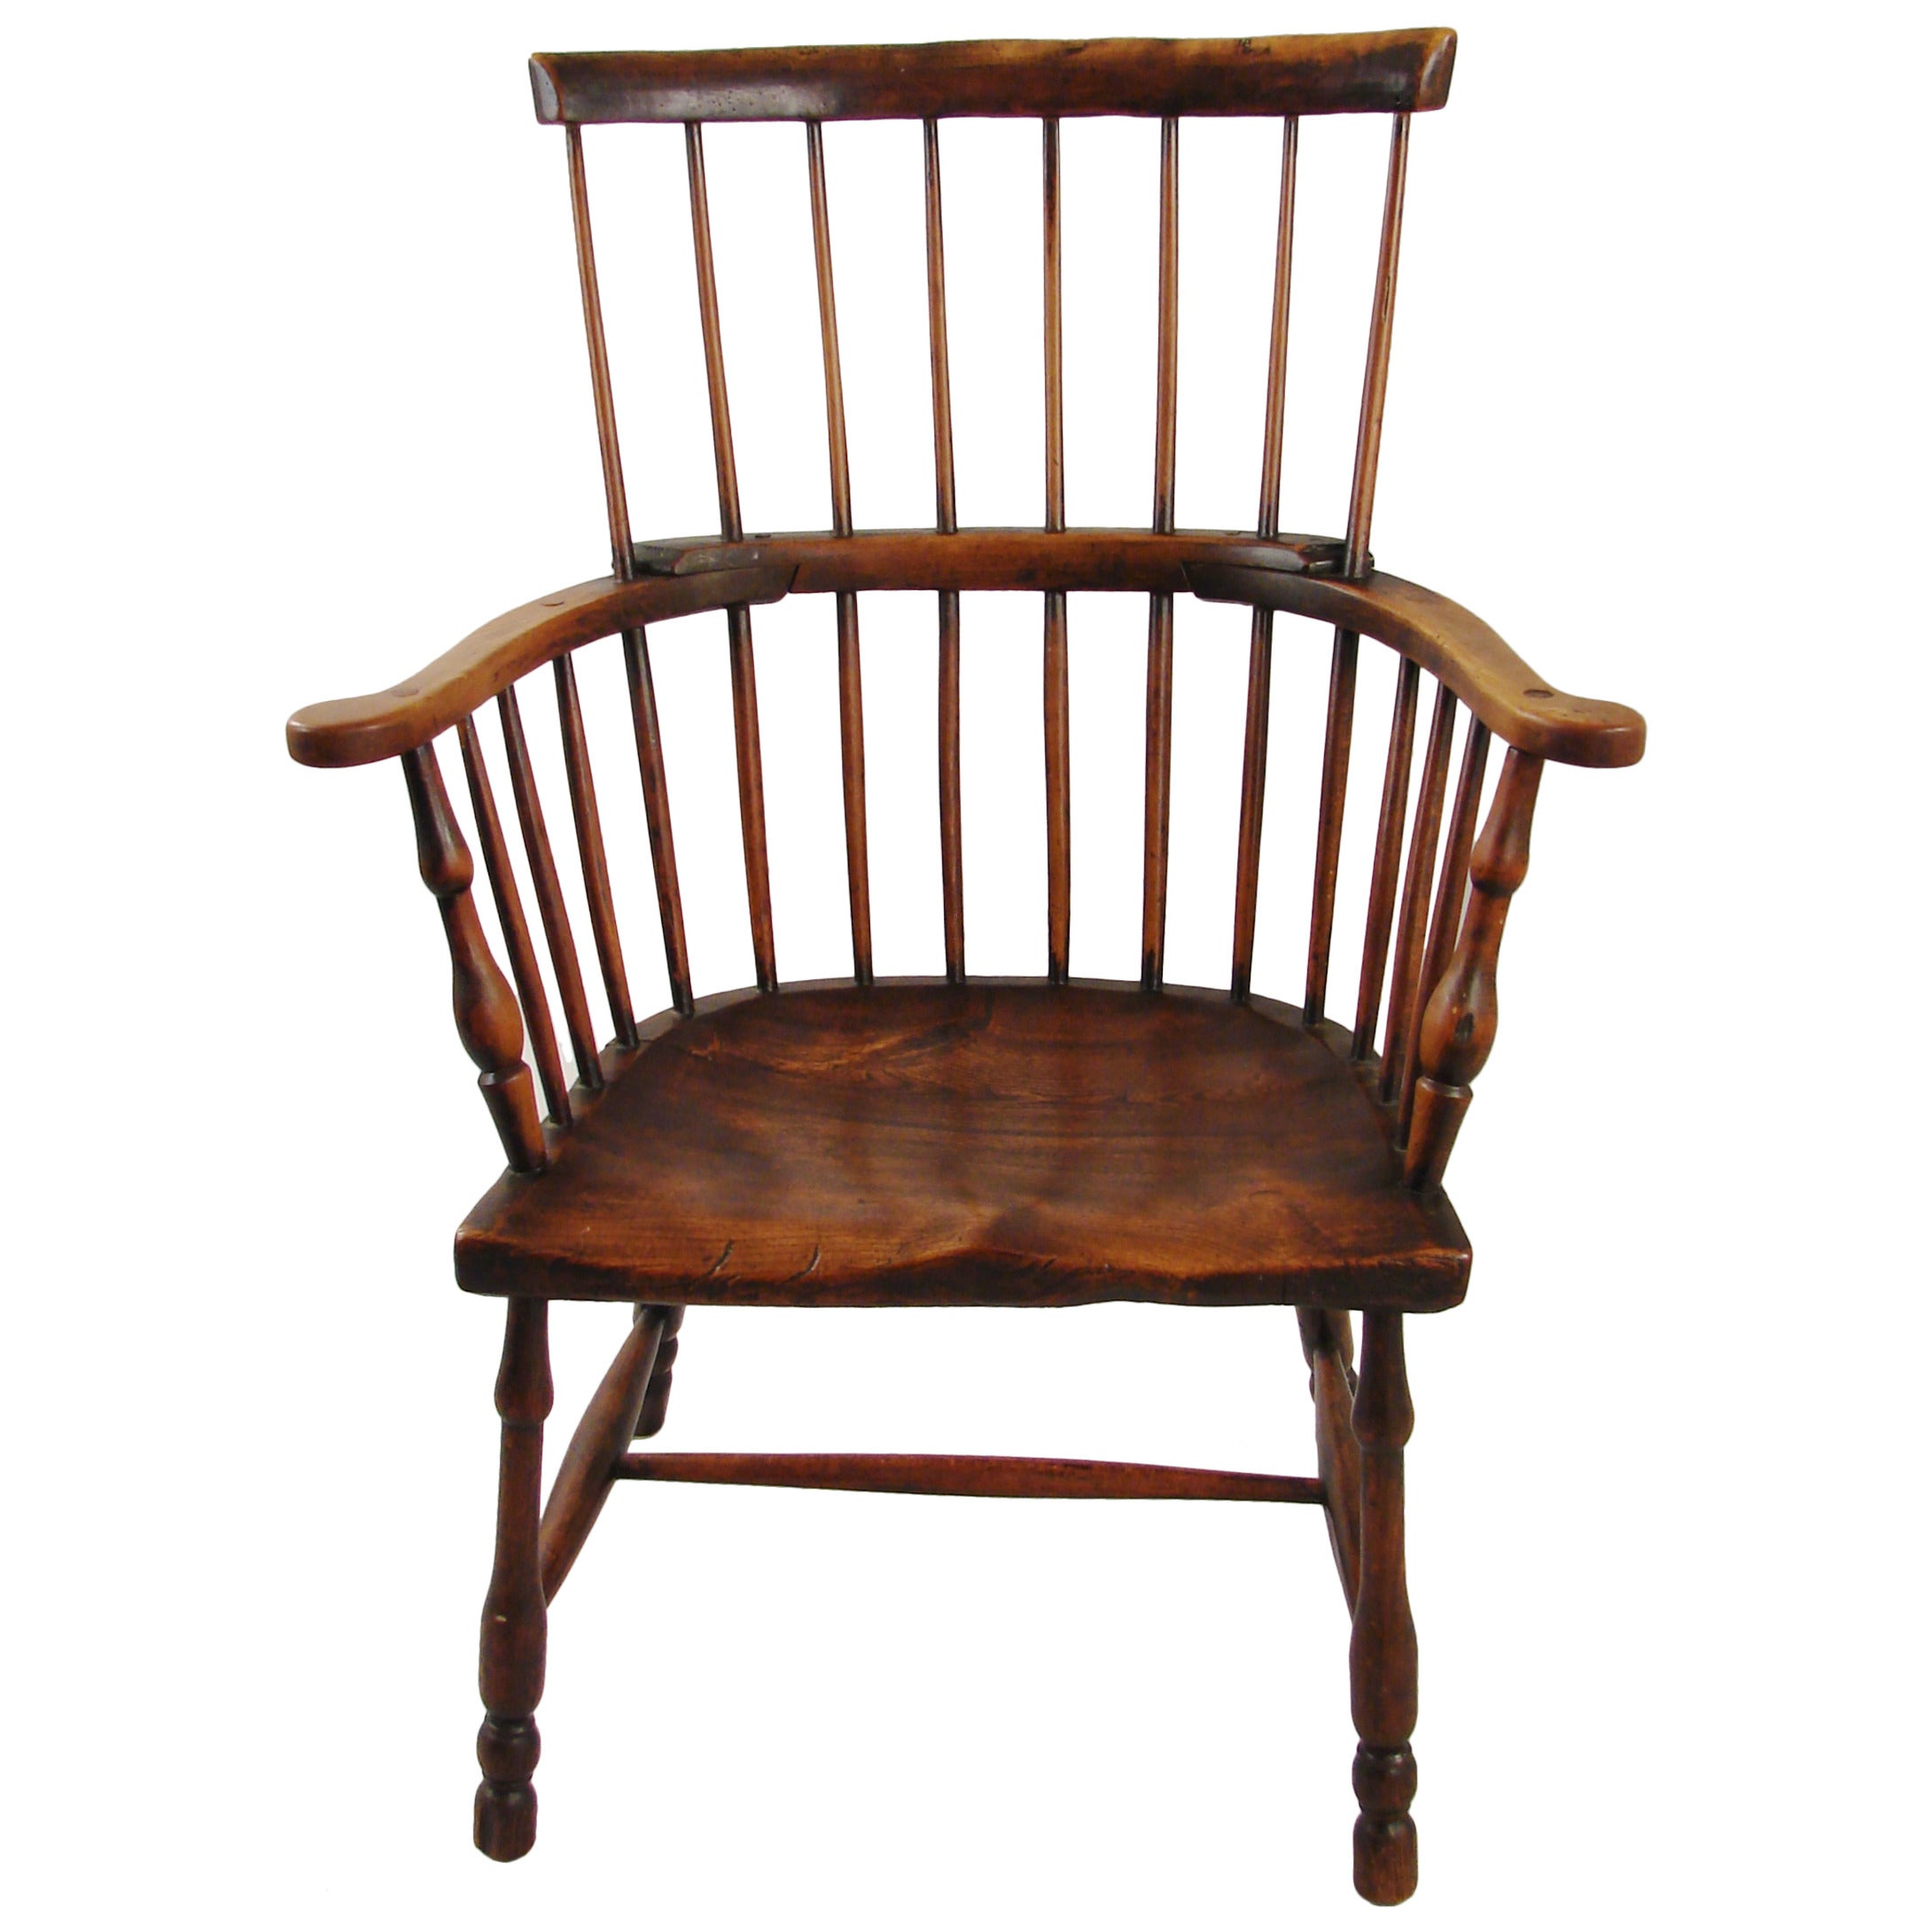 English Elm and Hickory Comb Back Windsor Armchair